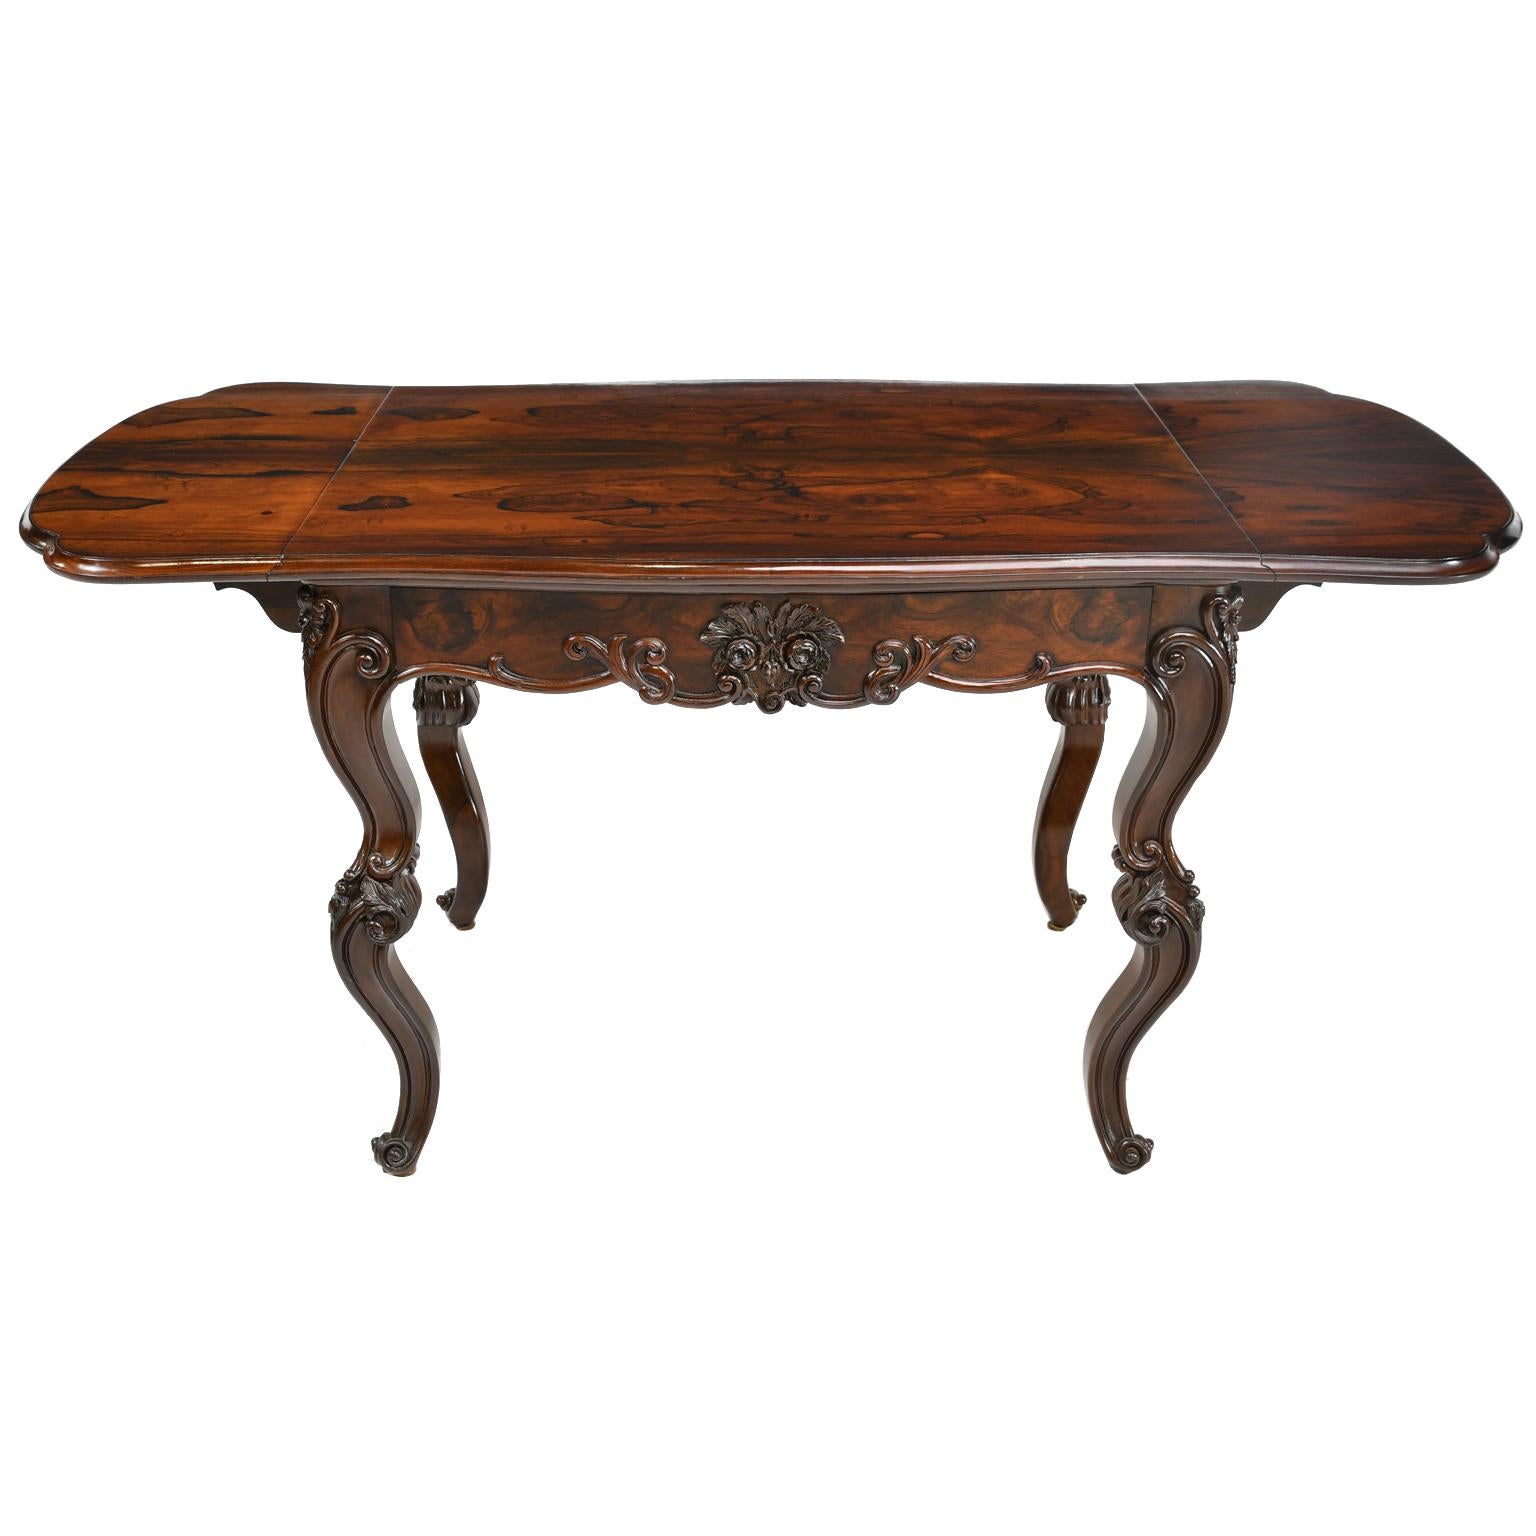 Hand-Carved Rosewood American Rococo Revival Sofa Table or Writing Table NYC, circa 1840 For Sale